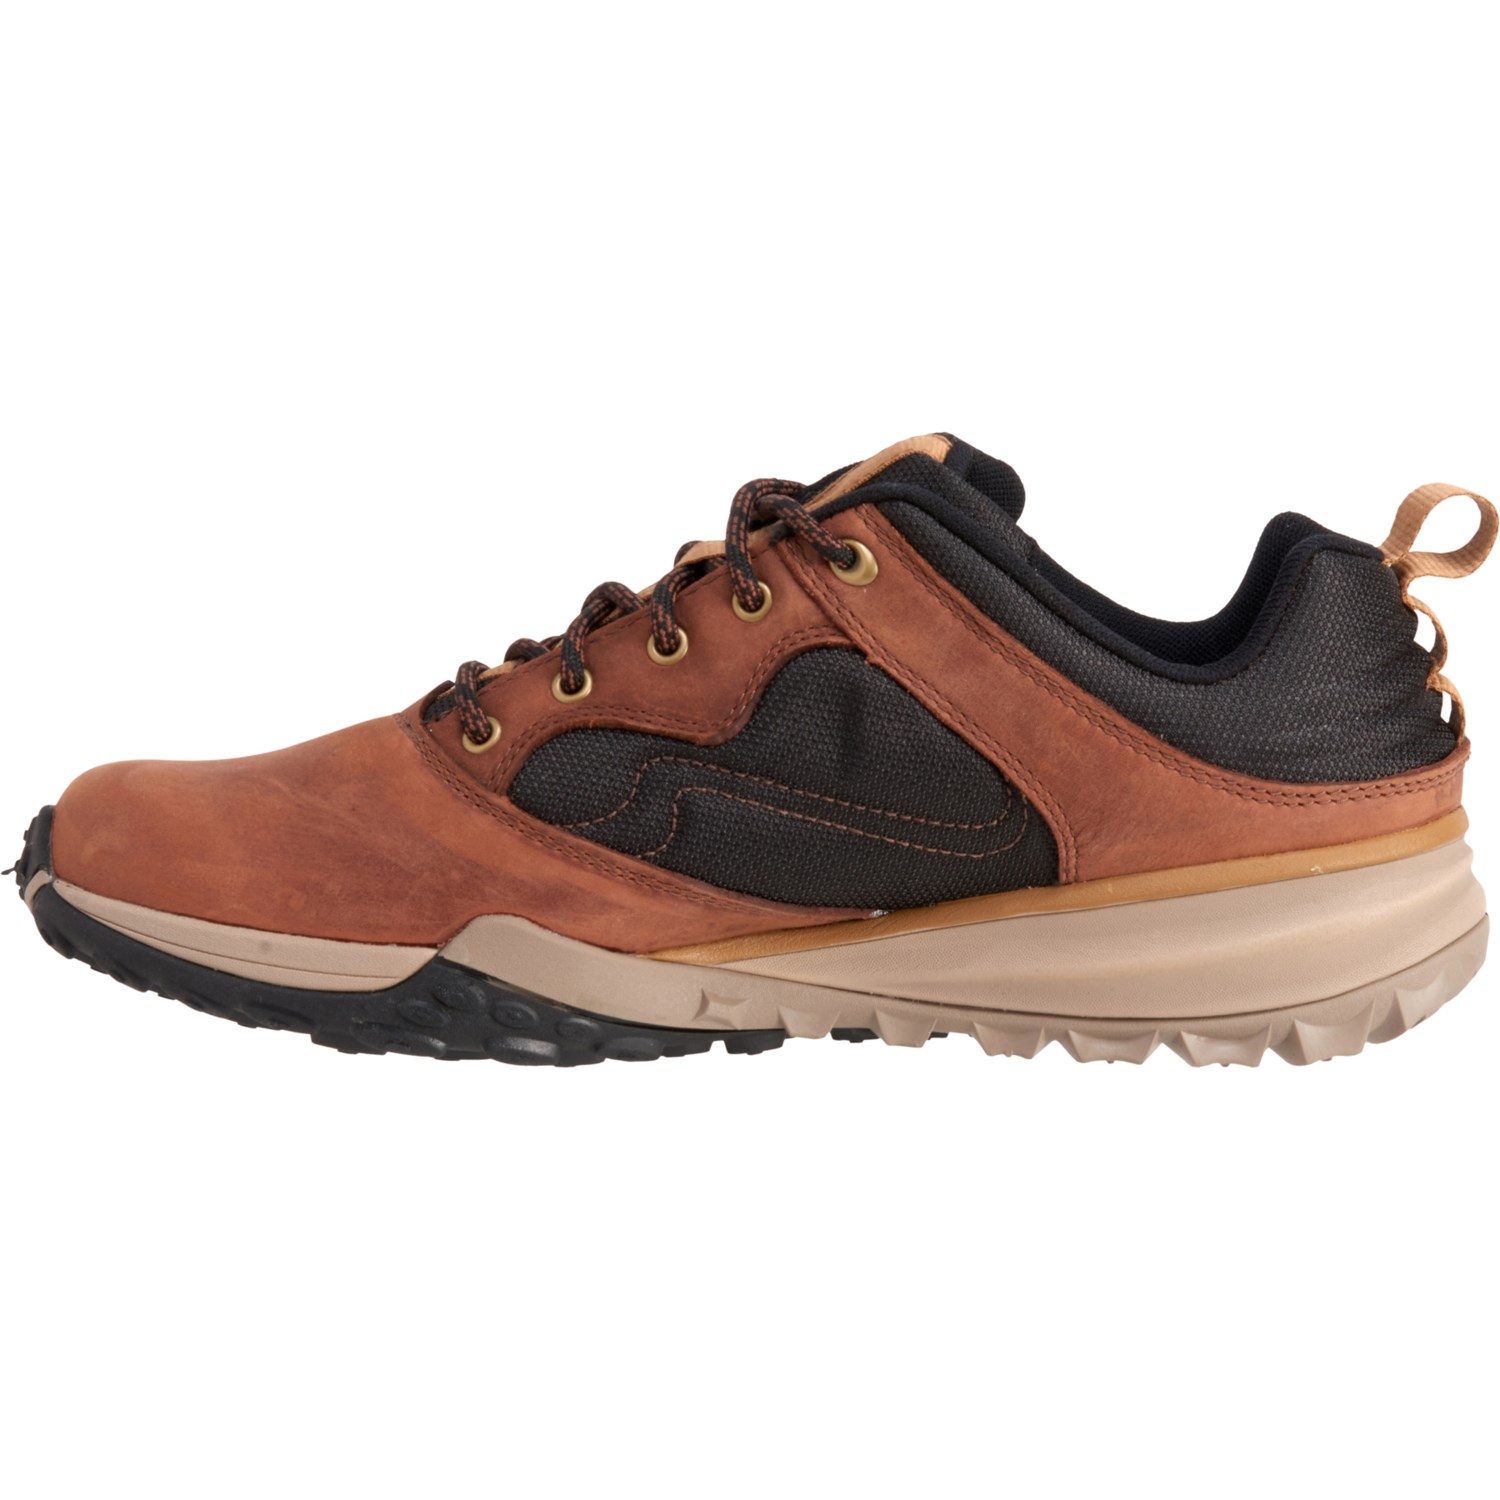 Merrell Havoc Wells Hiking Shoes (For Men) - Save 44%